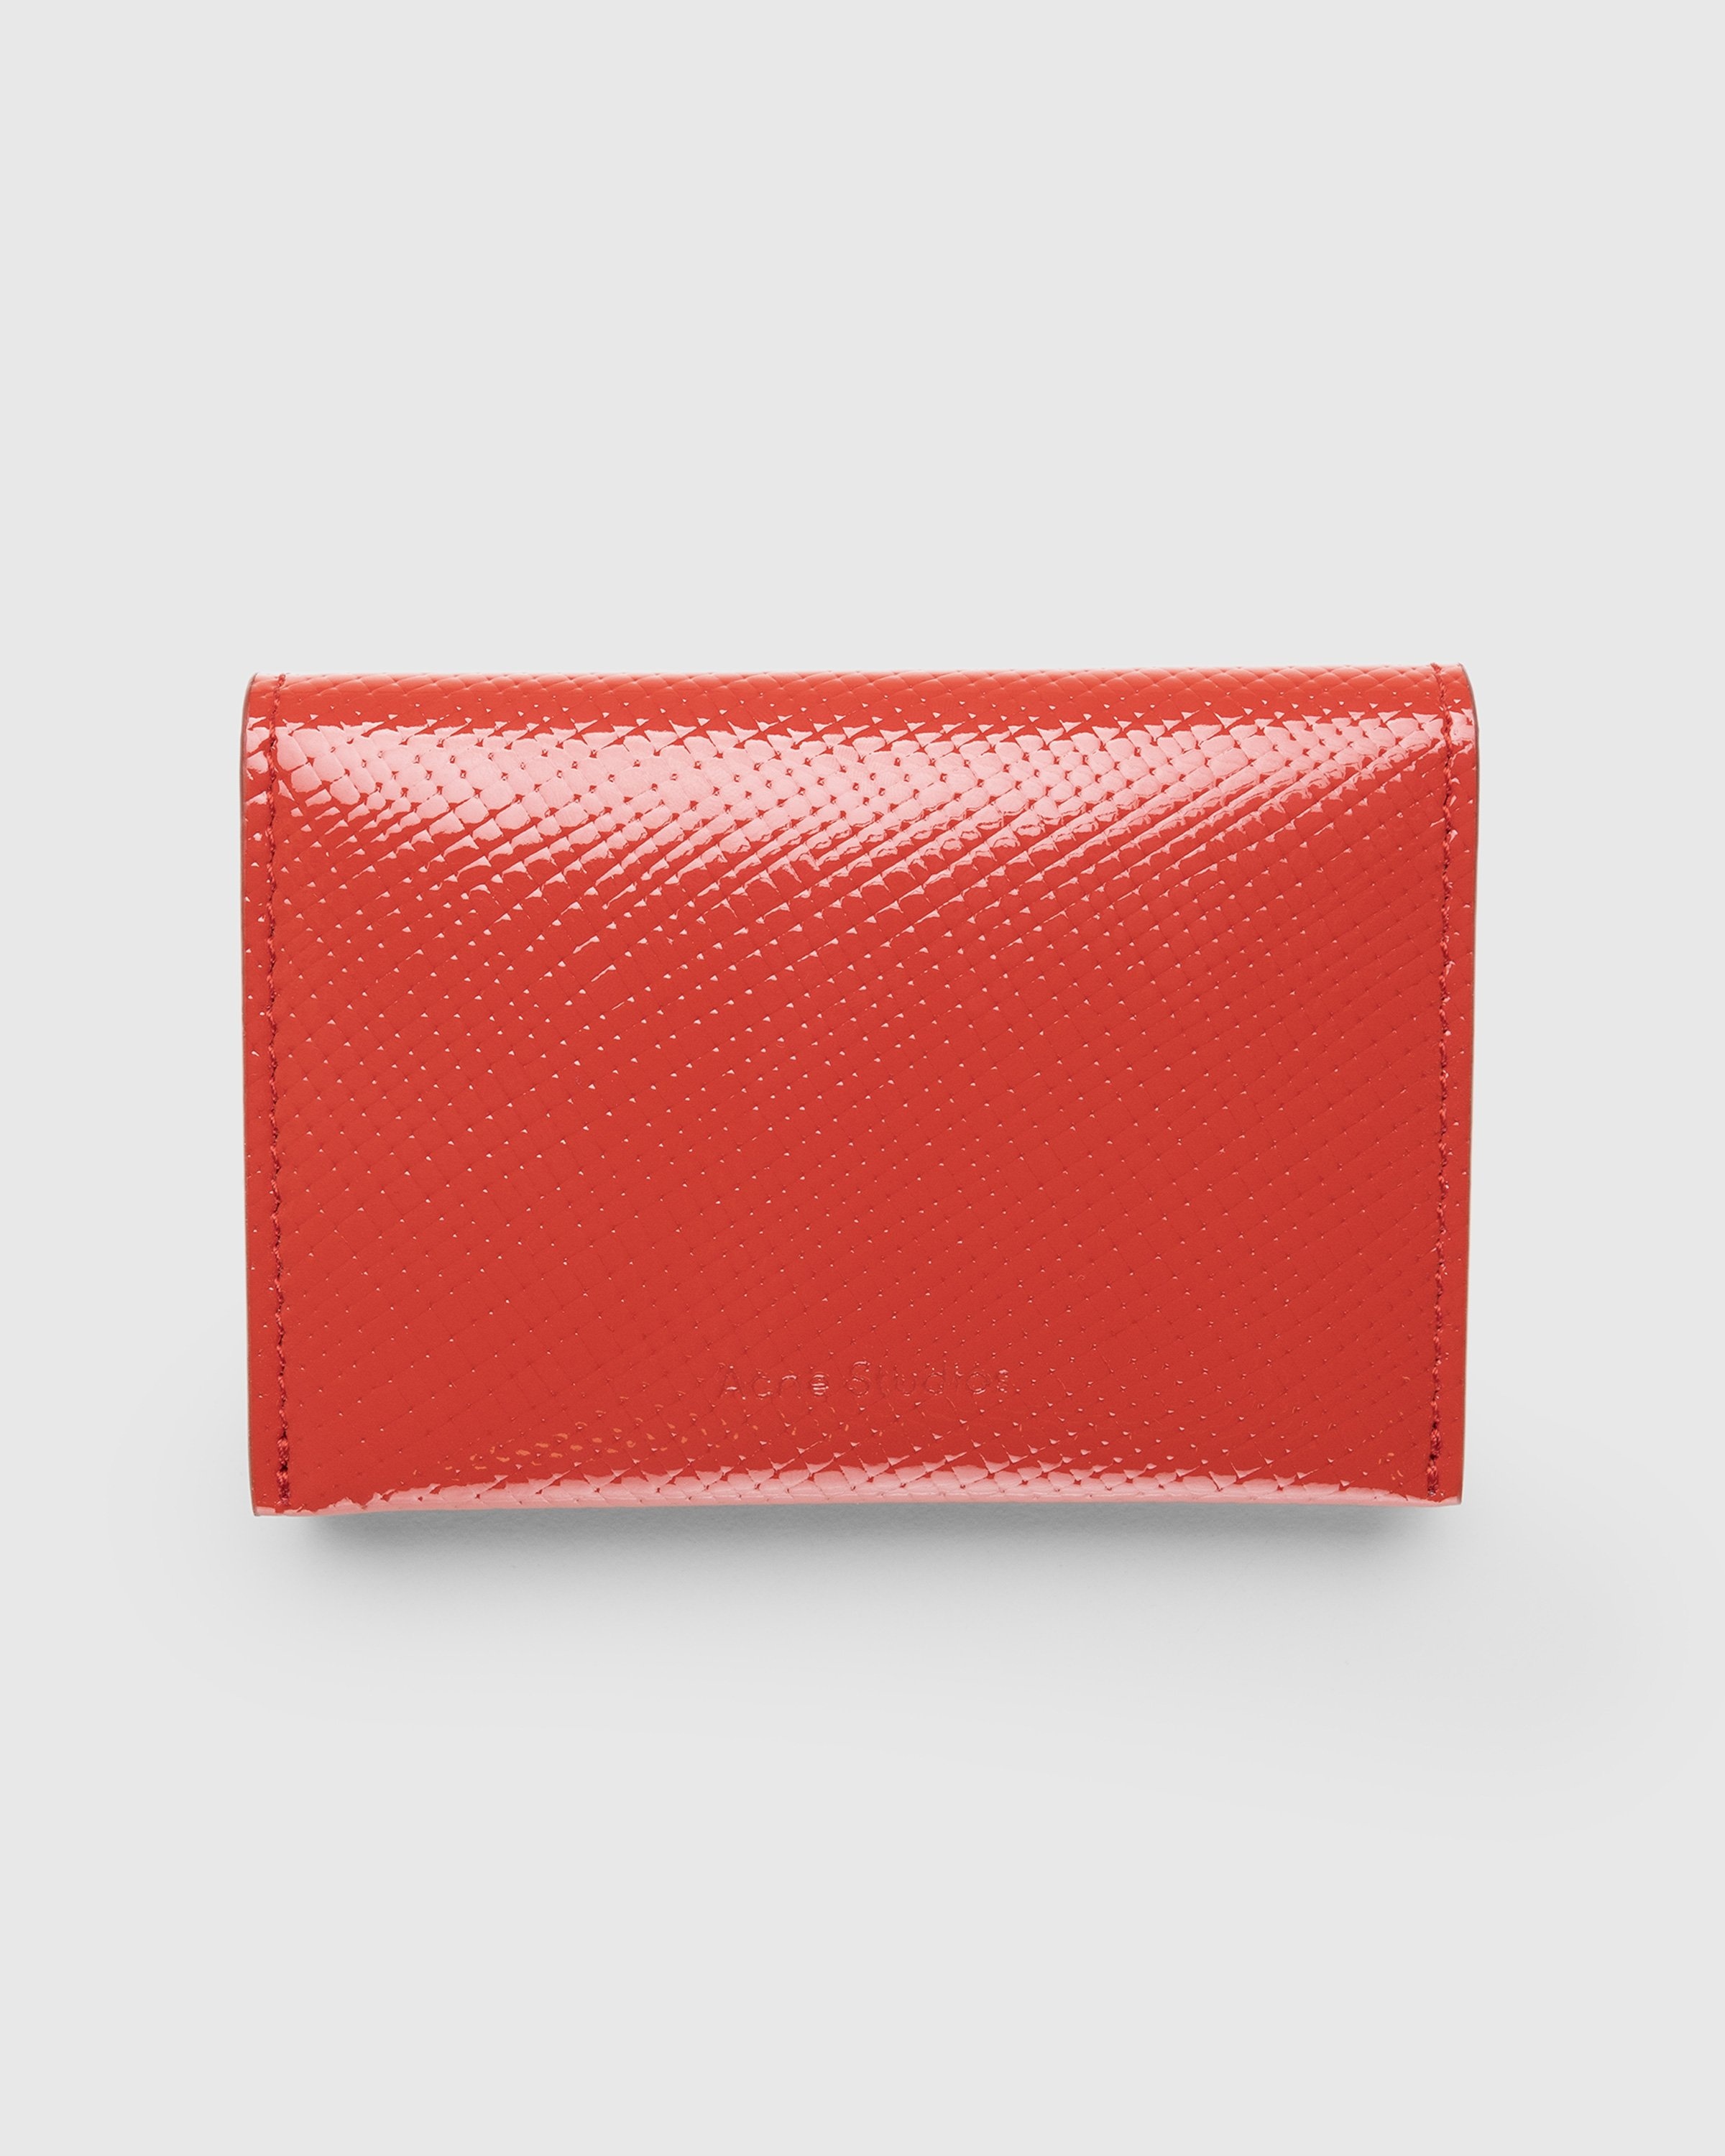 Acne Studios – Folded Card Holder Red - Wallets - Red - Image 1